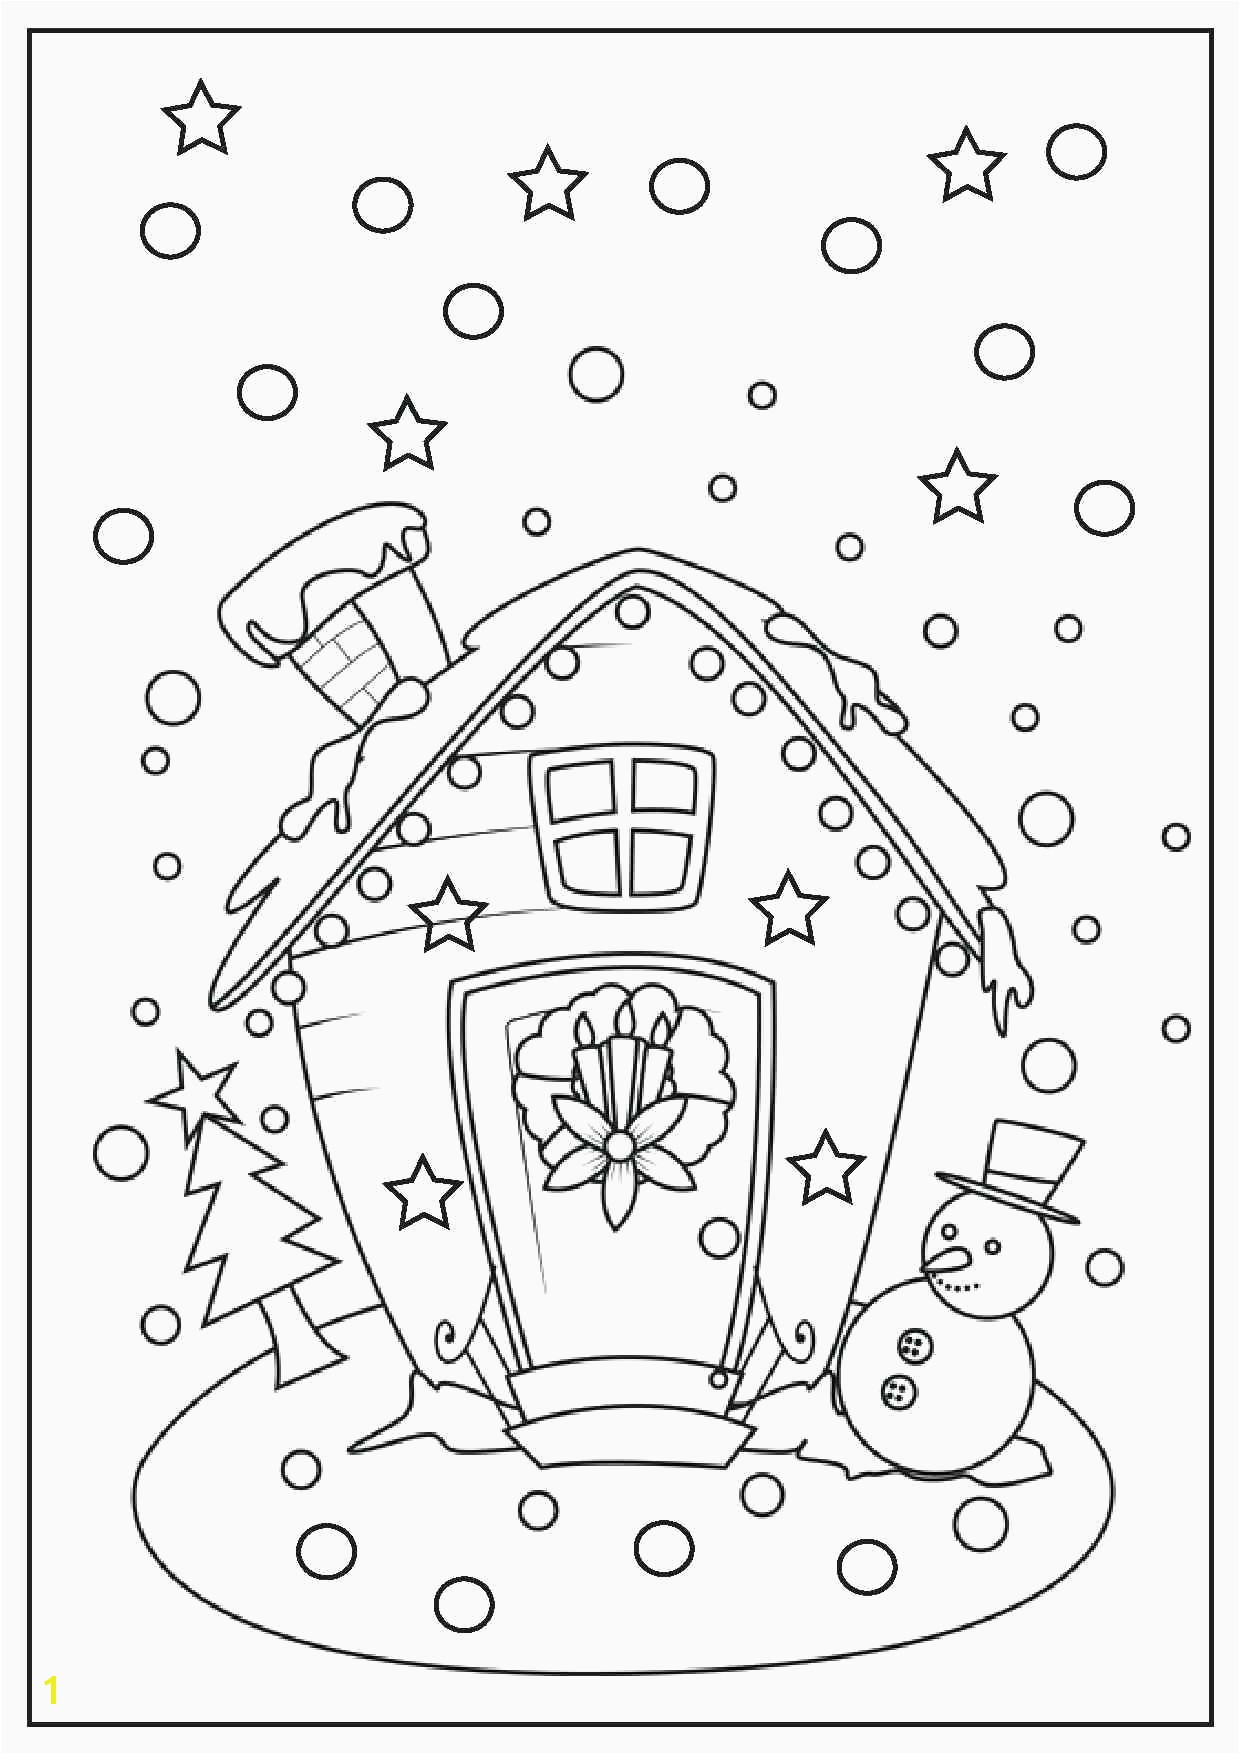 Disney Princess Printable Coloring Pages Unique Cool Coloring Page Unique Witch Coloring Pages New Crayola Pages